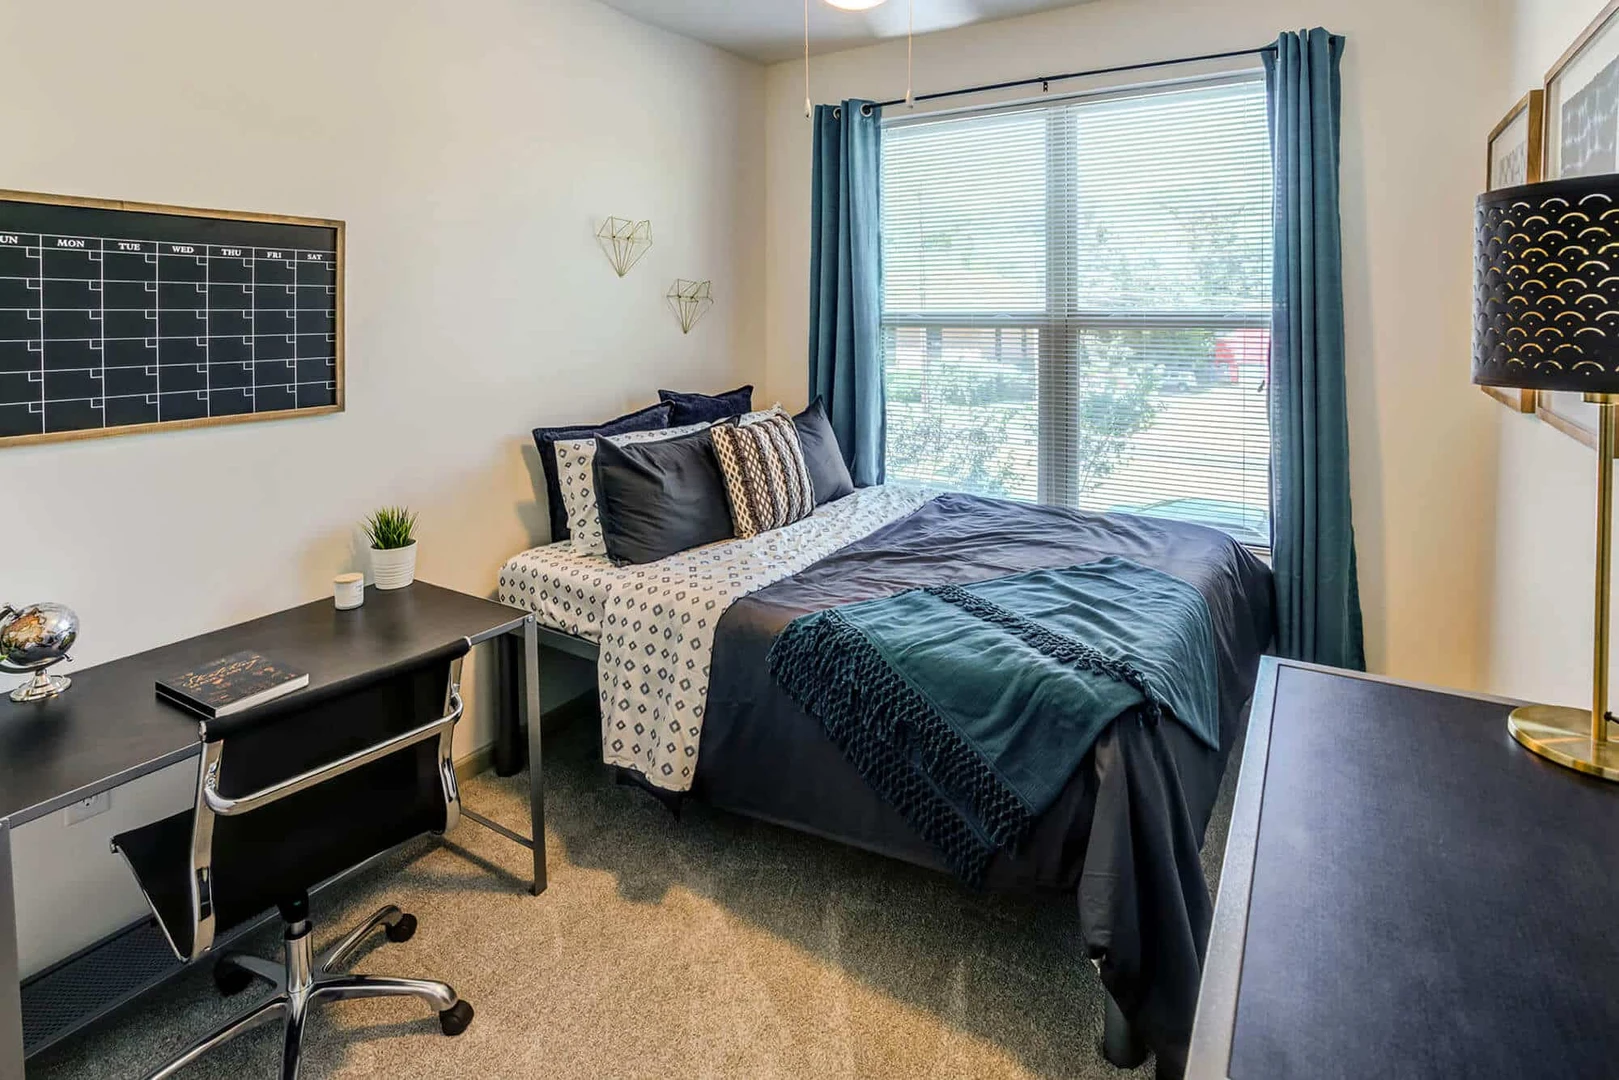 Renting rooms by the month in Raleigh